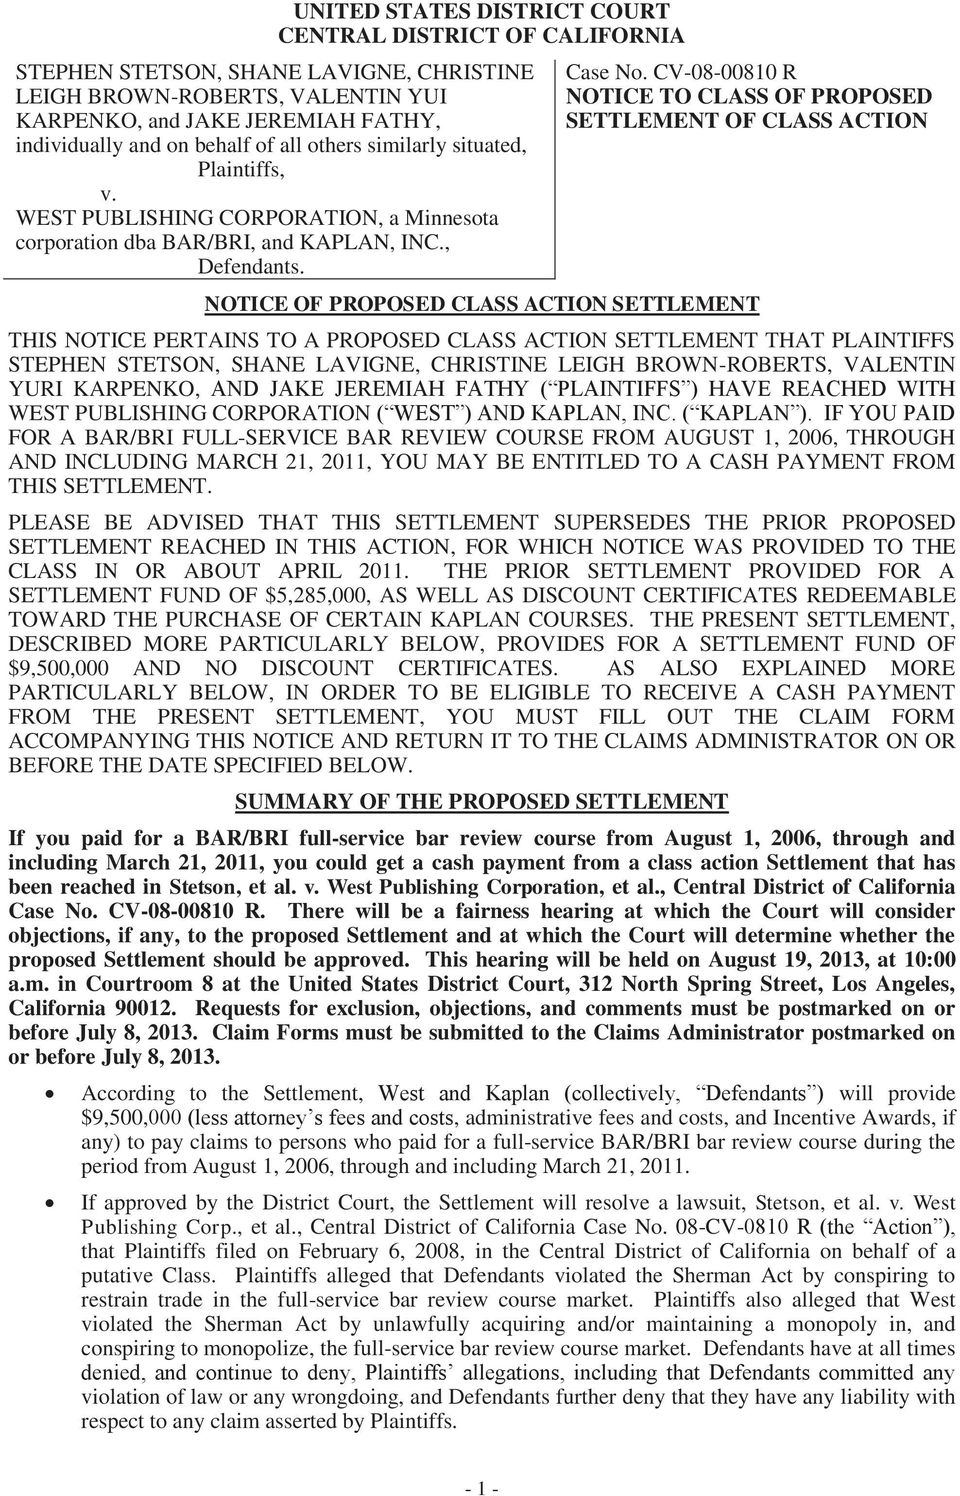 CV-08-00810 R NOTICE TO CLASS OF PROPOSED SETTLEMENT OF CLASS ACTION NOTICE OF PROPOSED CLASS ACTION SETTLEMENT THIS NOTICE PERTAINS TO A PROPOSED CLASS ACTION SETTLEMENT THAT PLAINTIFFS STEPHEN